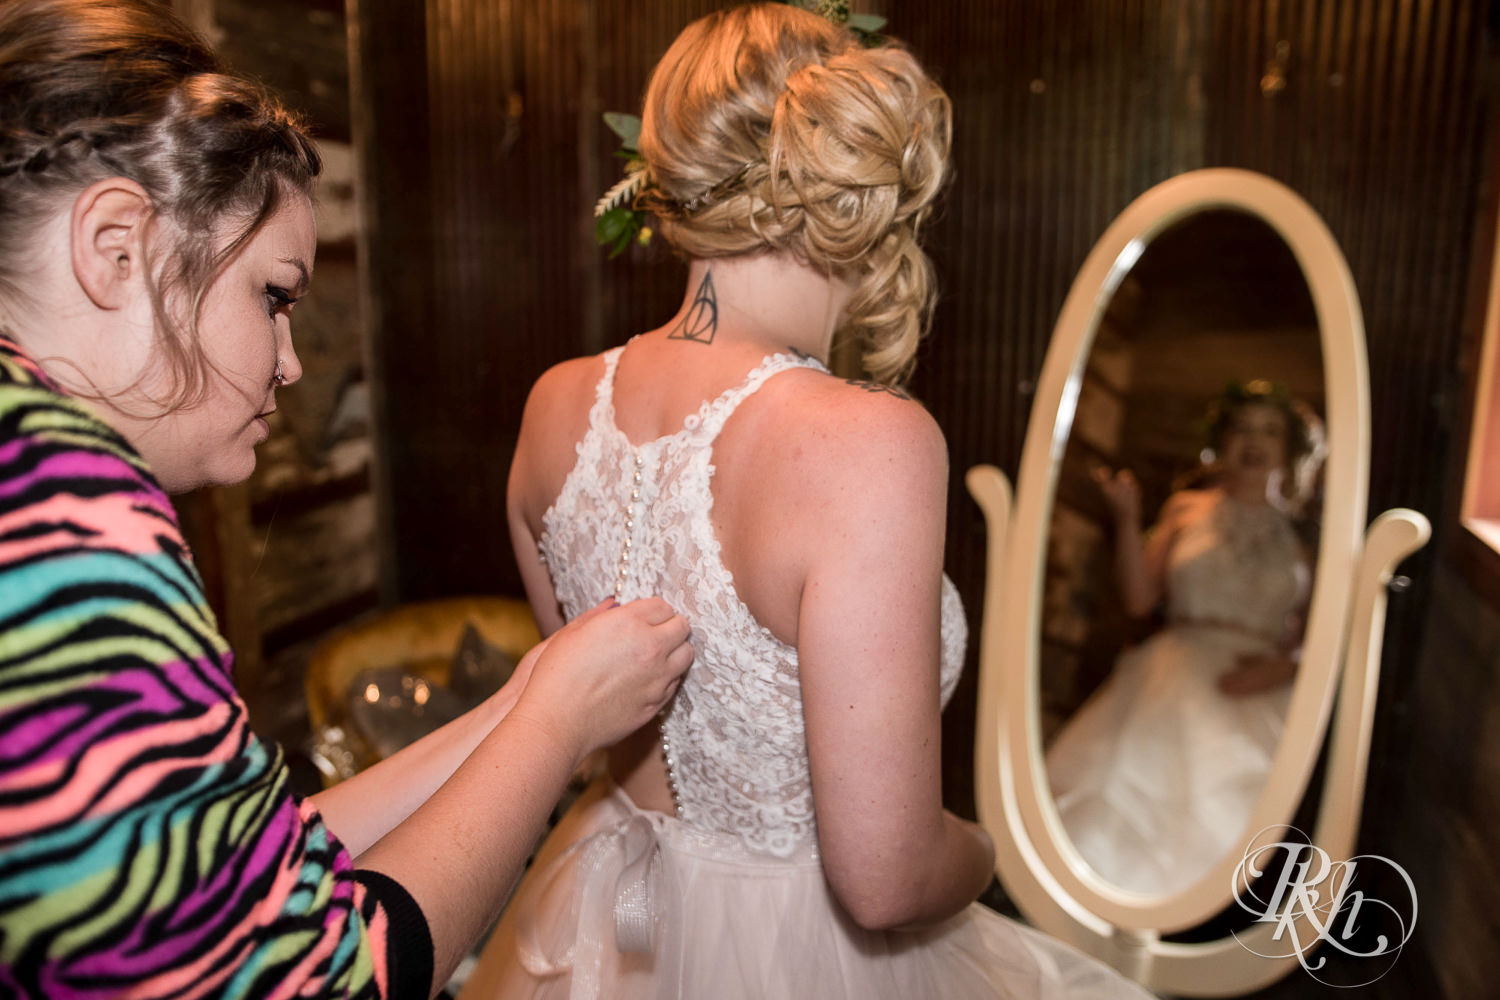 Wedding party helps bride get into wedding dress at Coops Event Barn in Dodge Center, Minnesota.